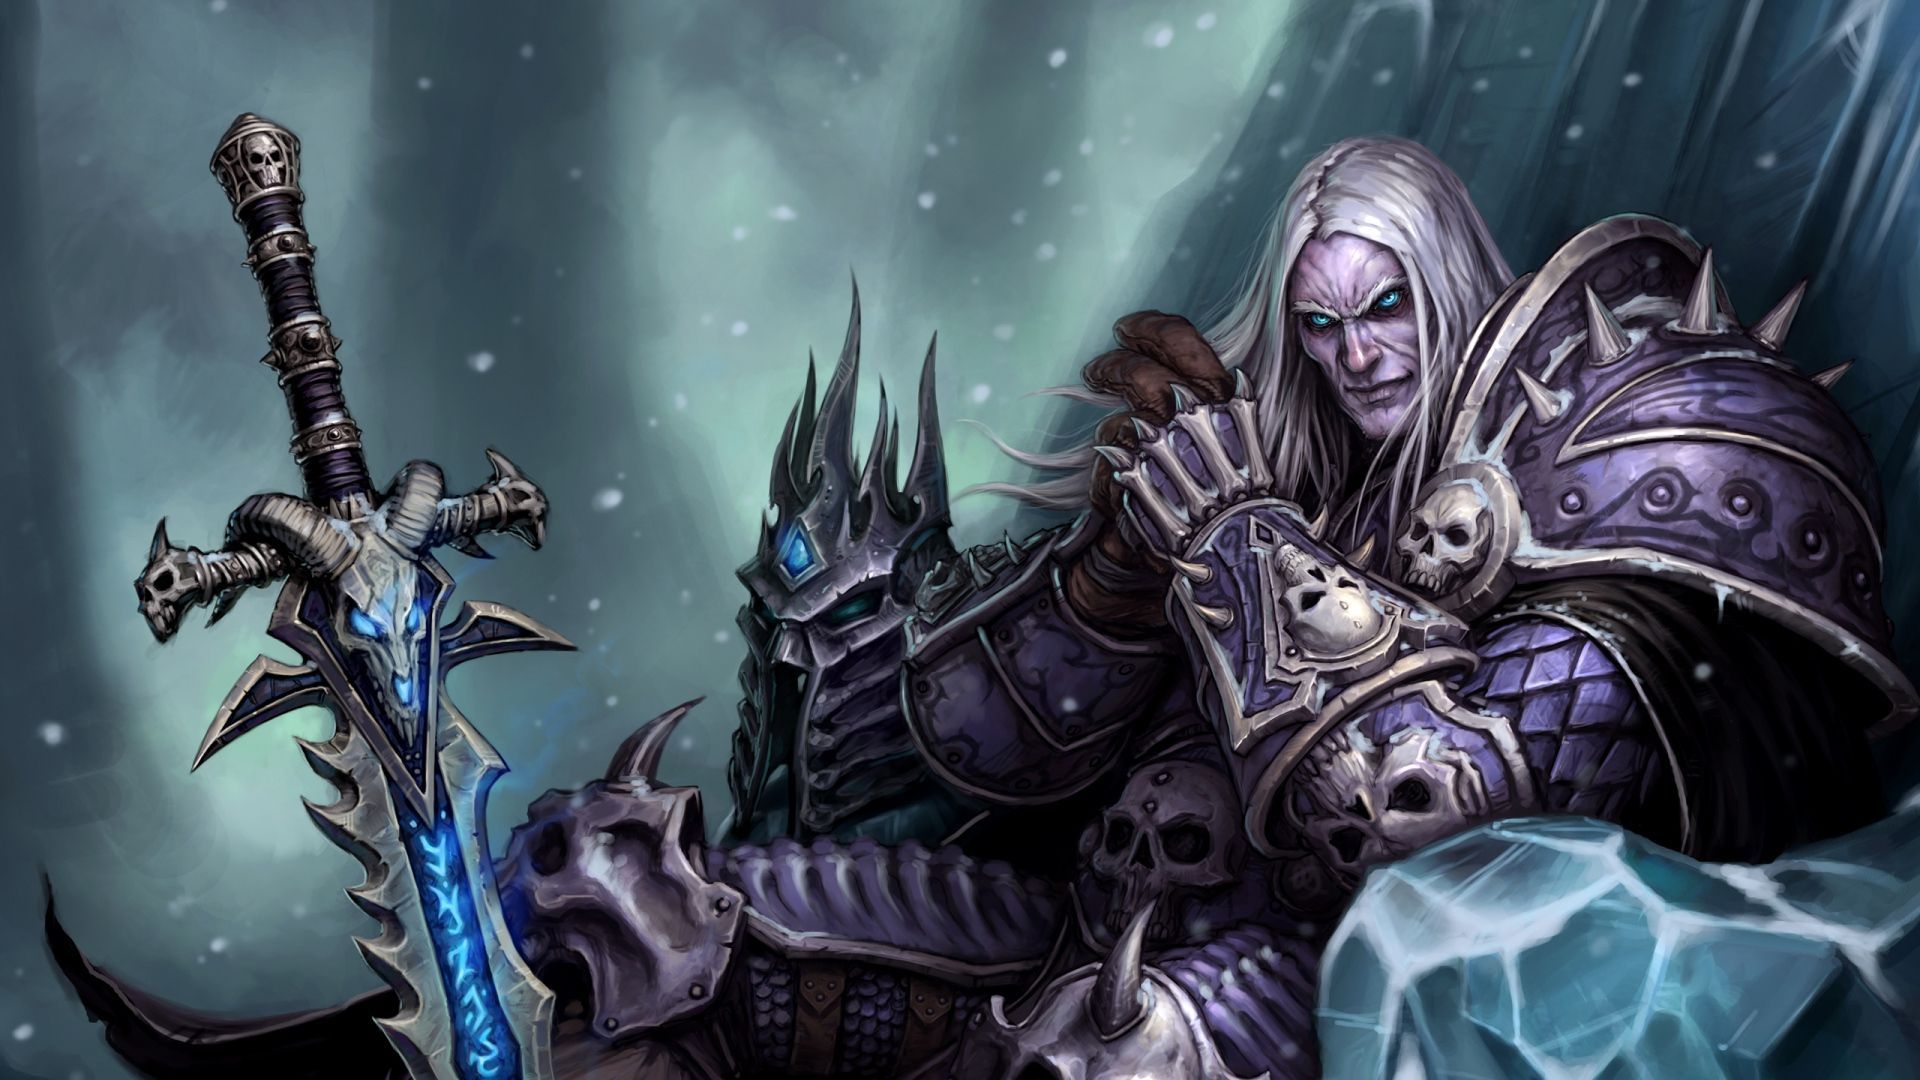 Download Wallpaper 1920x1080 The lich king, World of warcraft ...